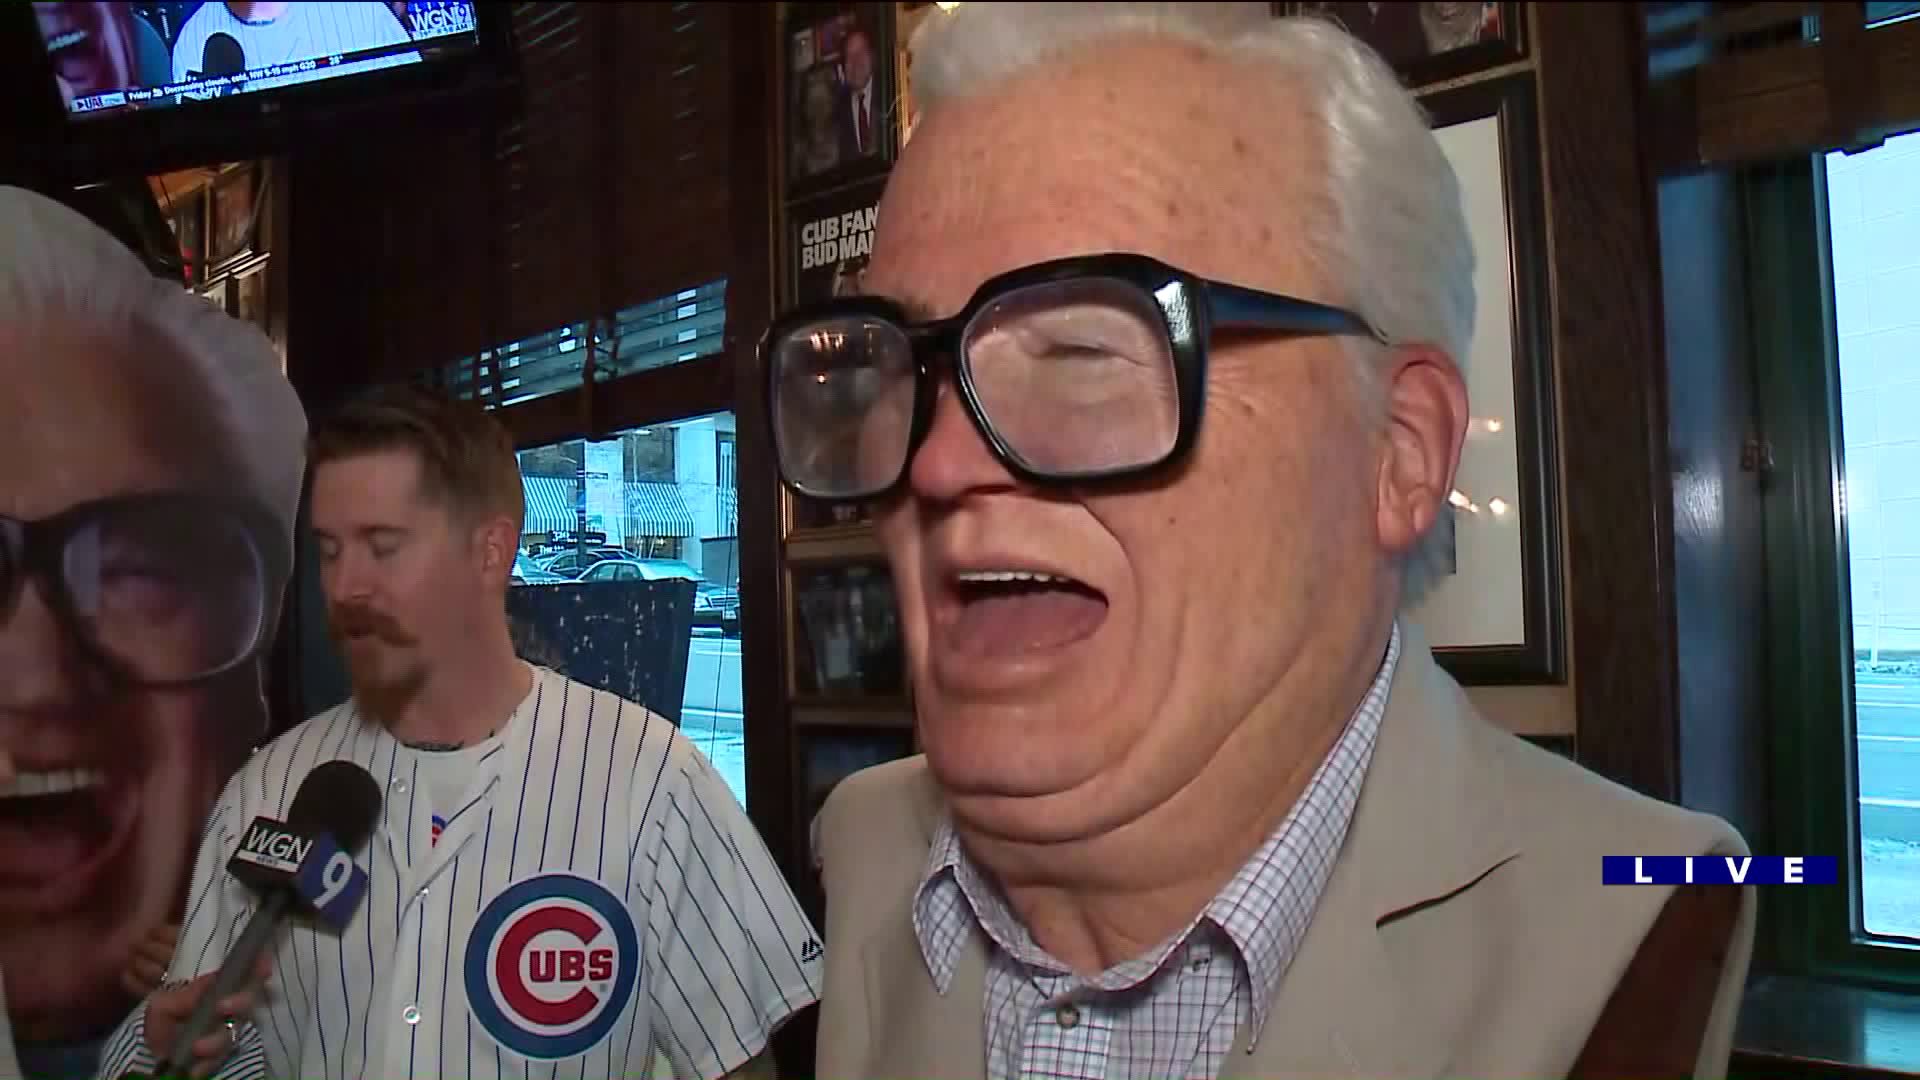 Around Town previews the 20th Annual Worldwide Toast to Harry Caray